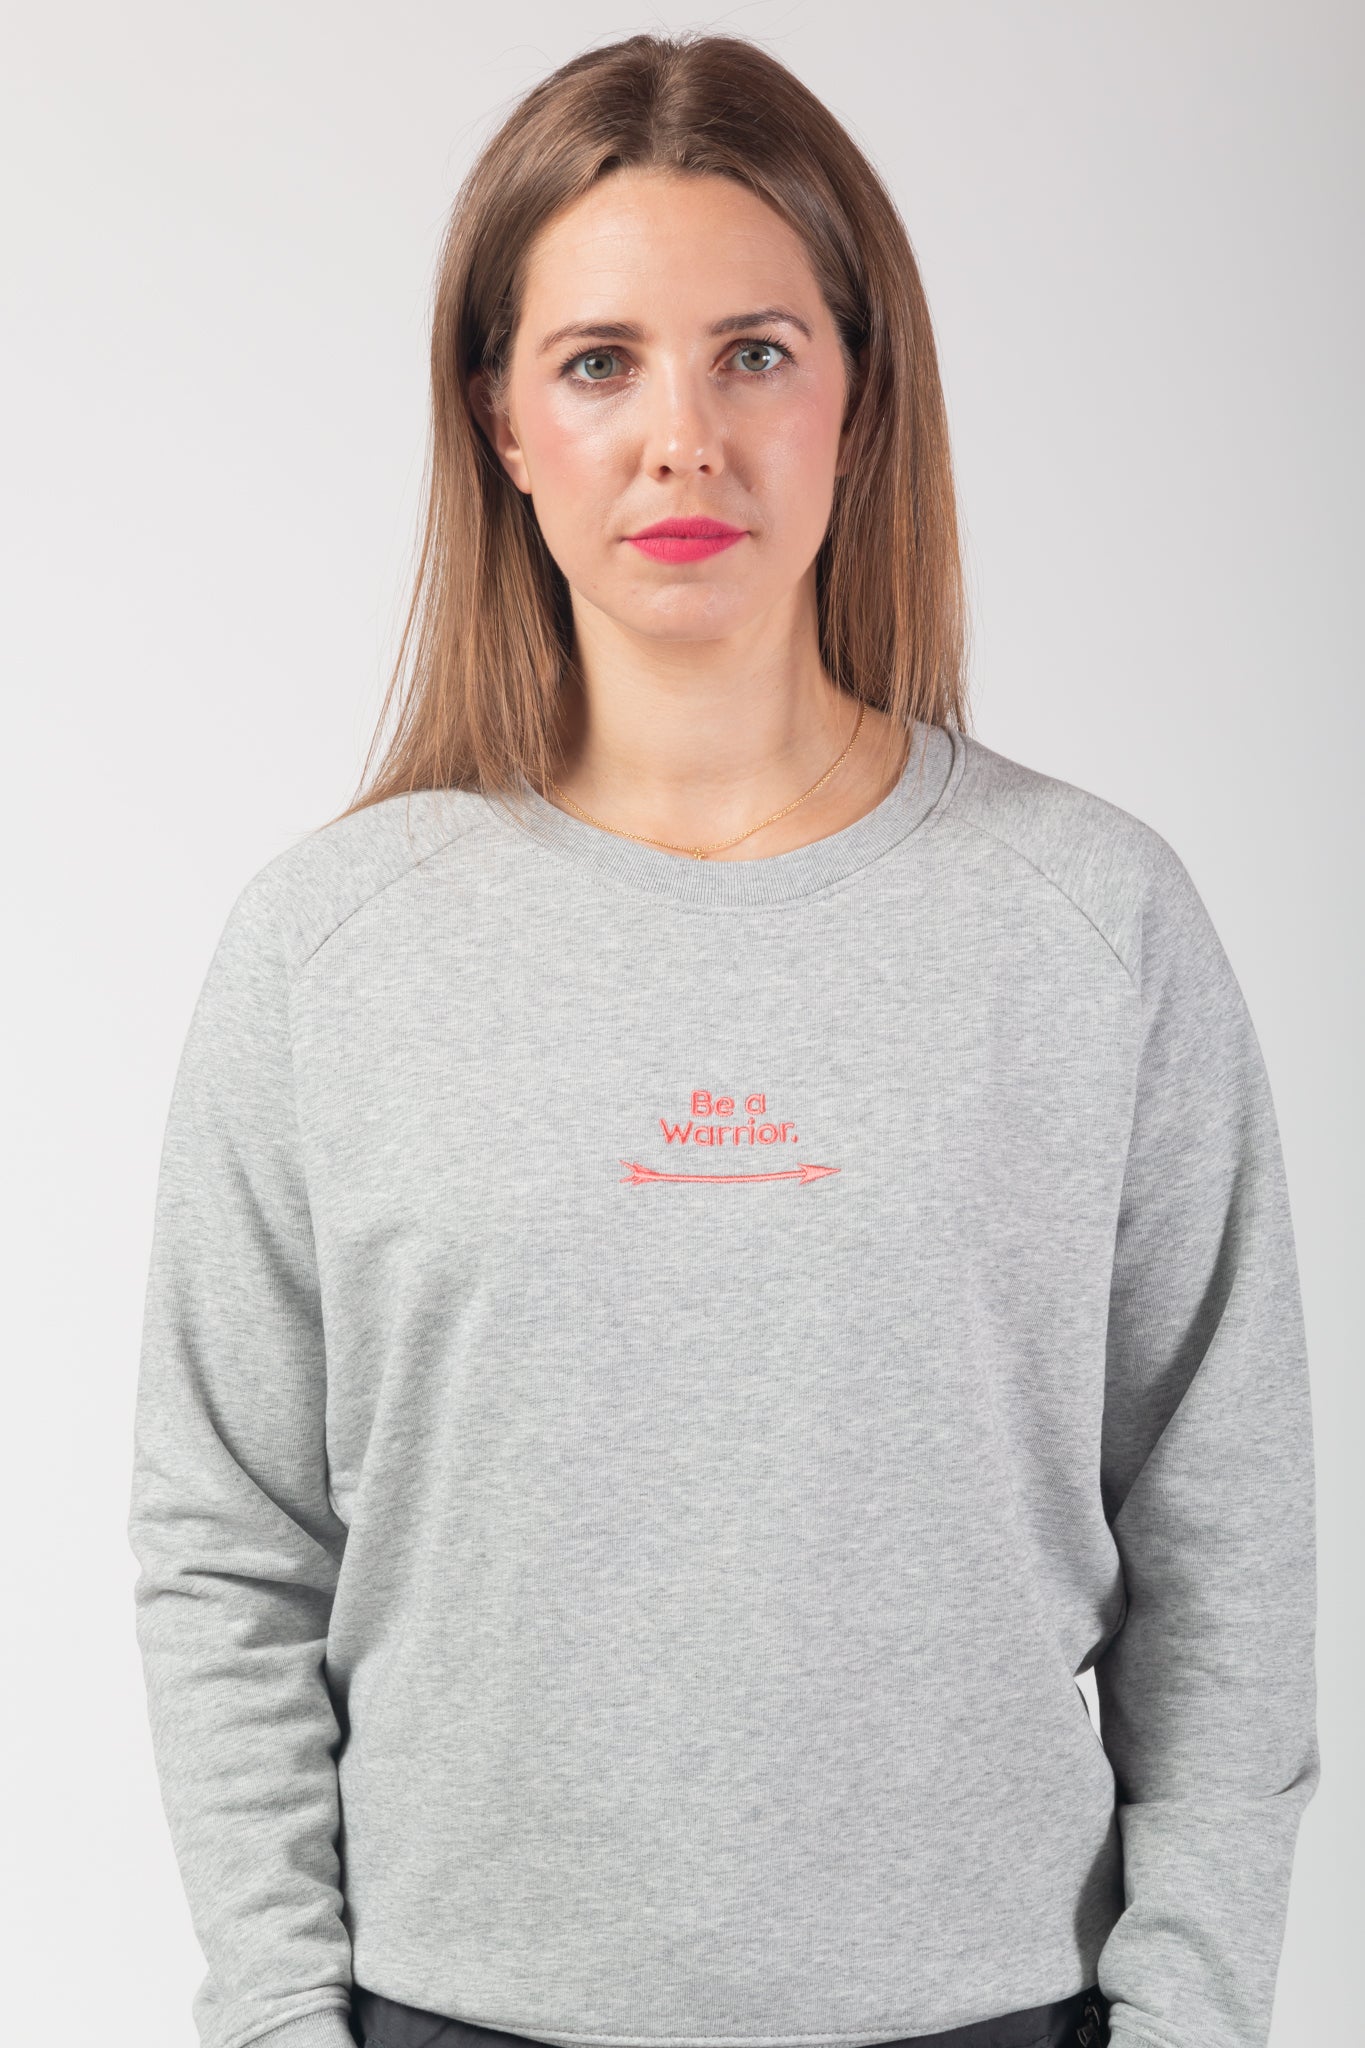 "Be a Warrior" Sweatshirt coral/ grey - Embroidery